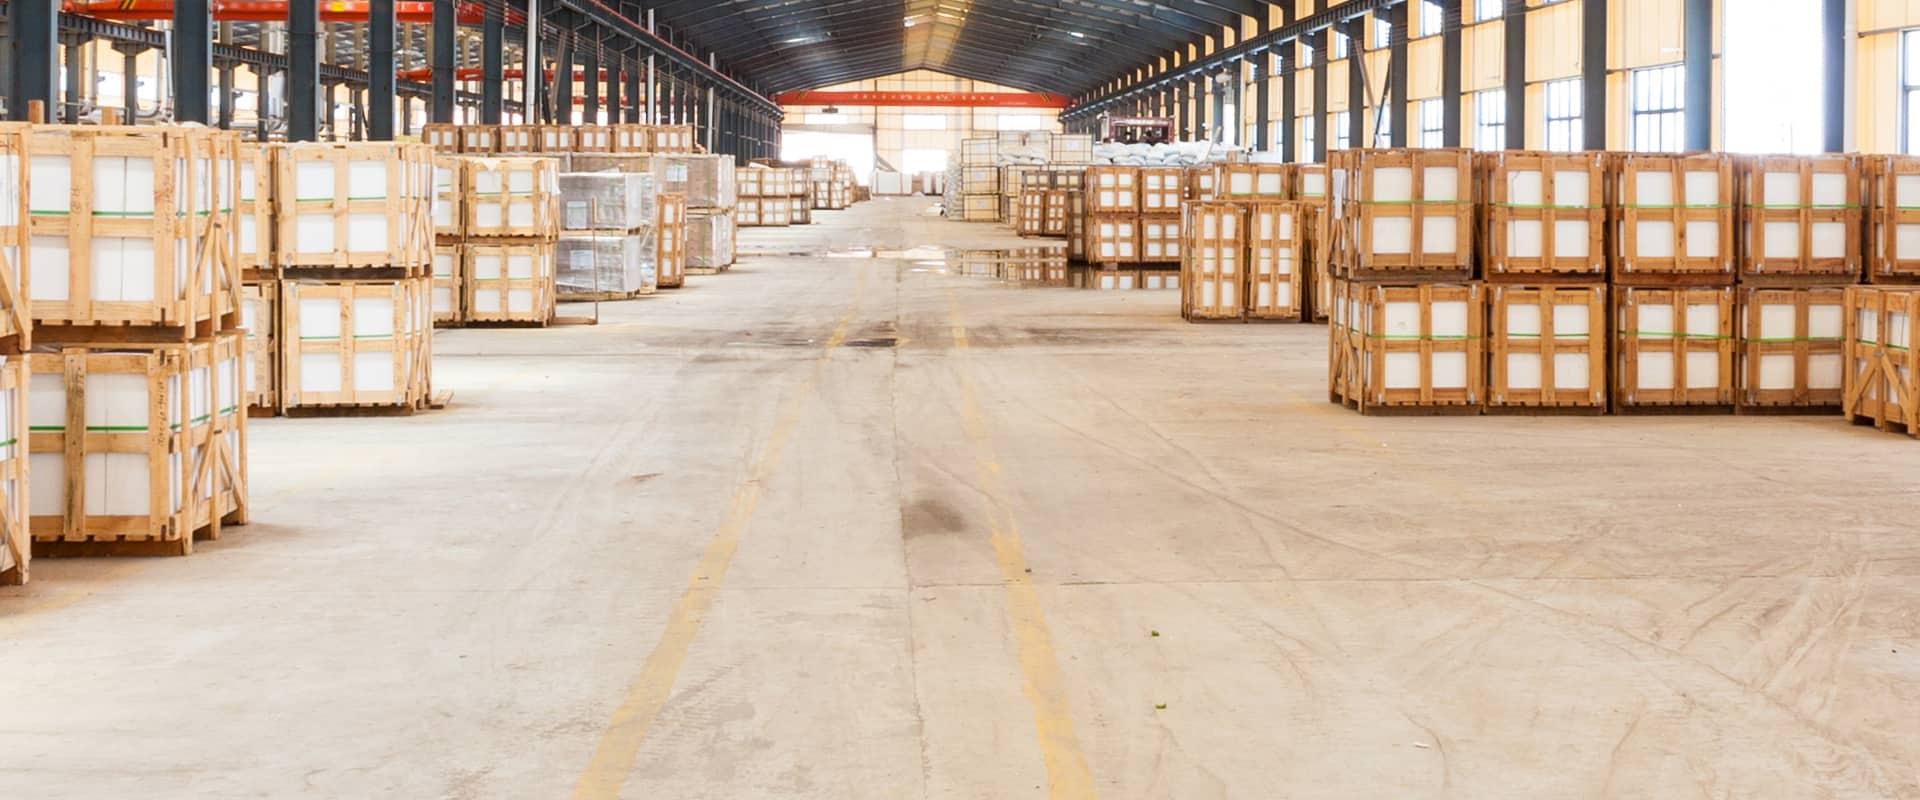 interior view of a warehouse in fort worth texas